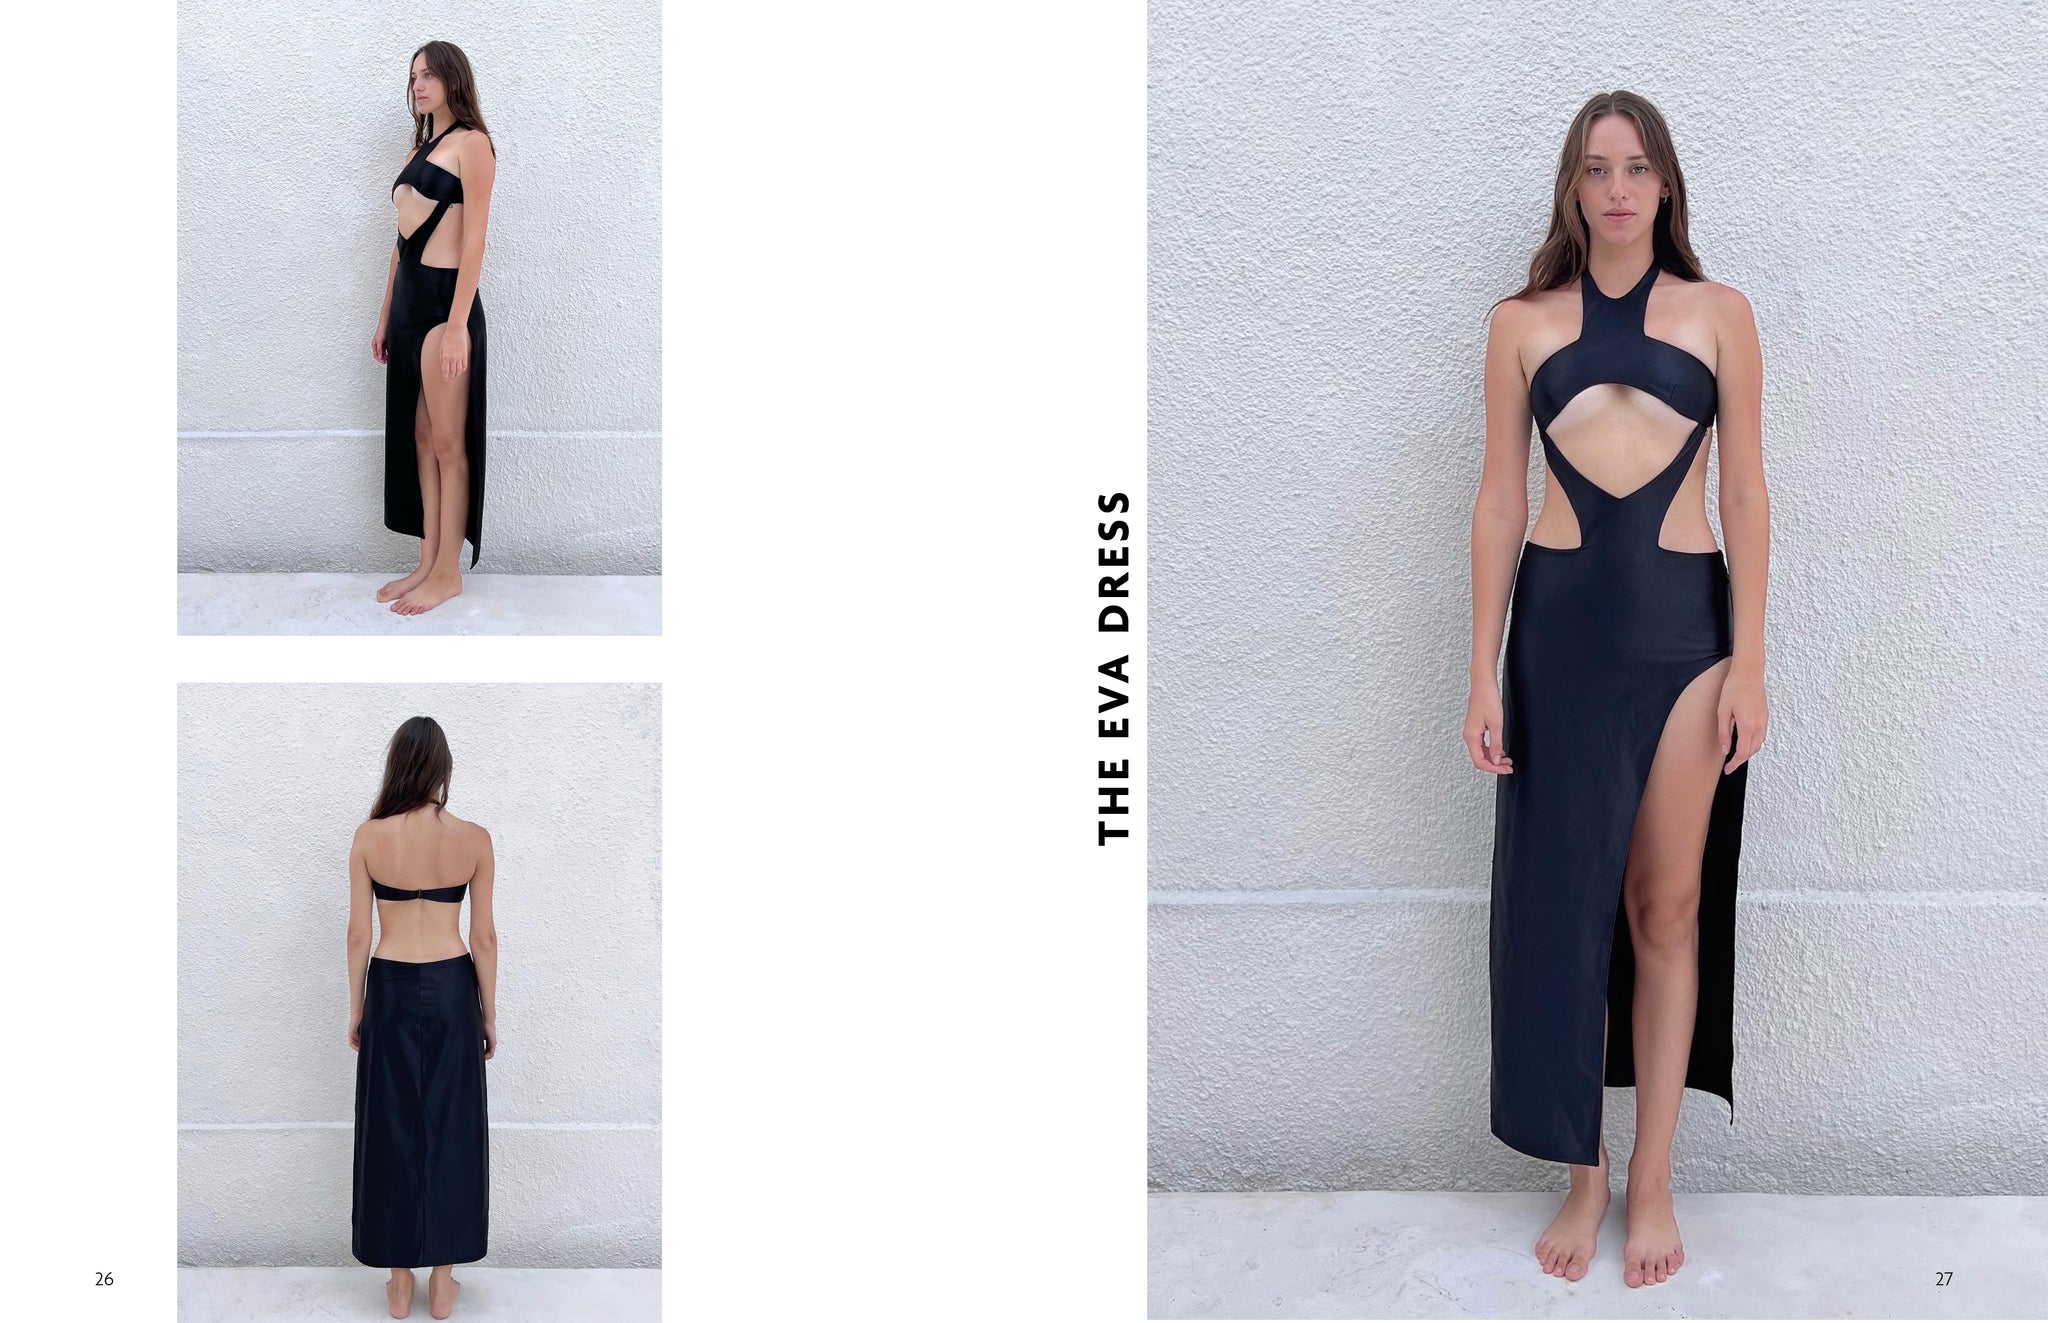 diaspora resort swimwear collection cut out dress black slit sexy satin vacation dinner outfit fashion luxury